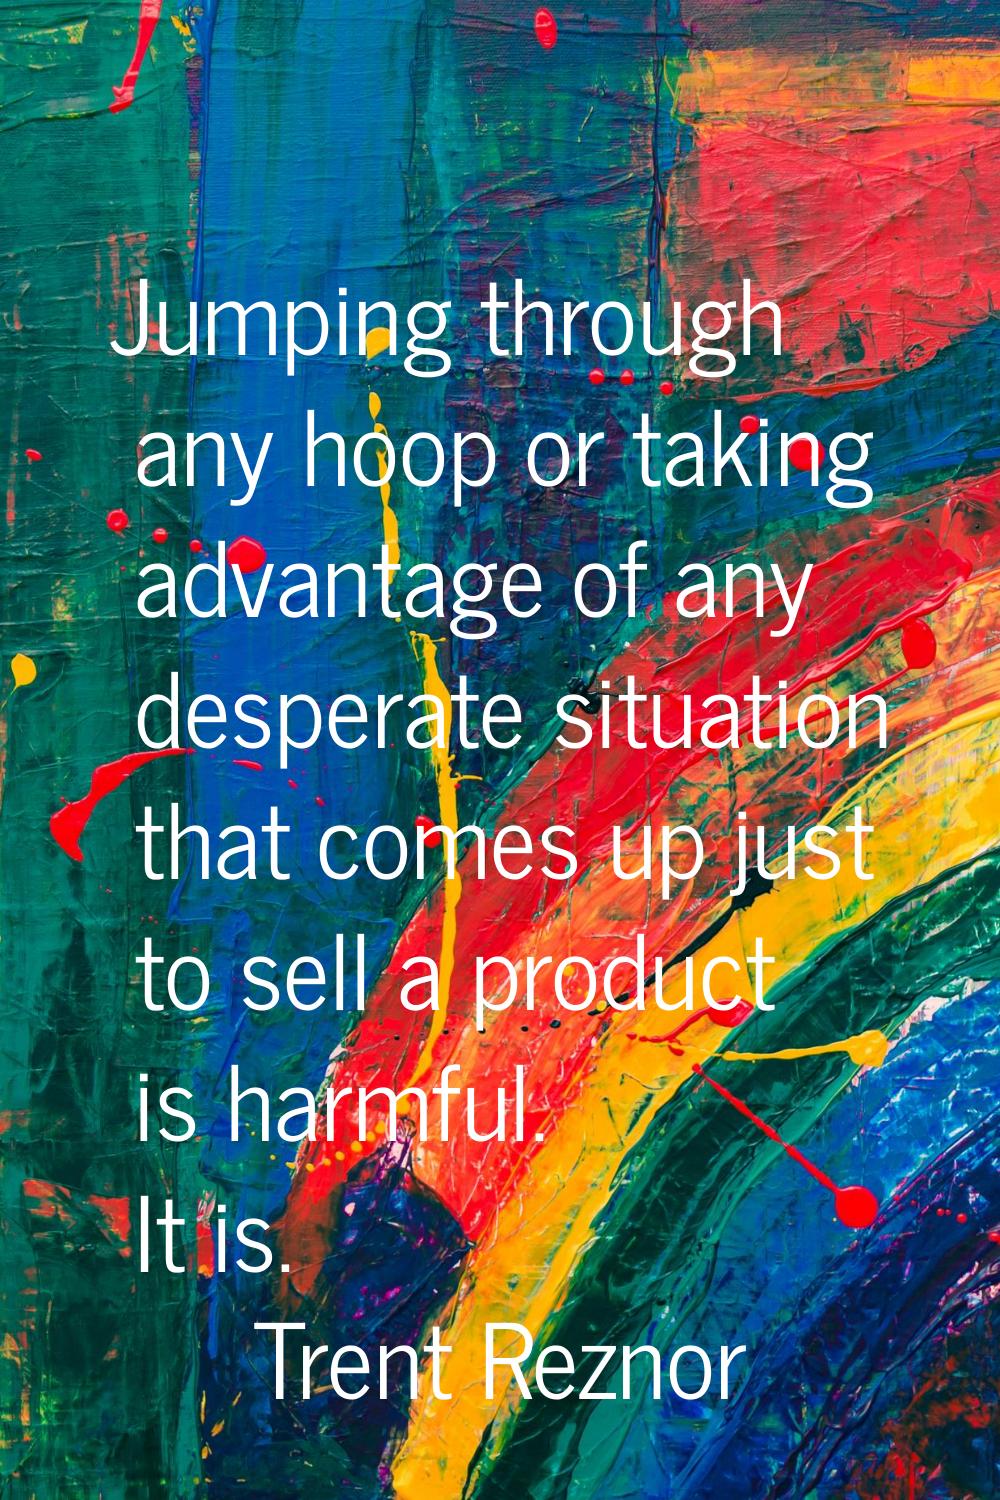 Jumping through any hoop or taking advantage of any desperate situation that comes up just to sell 